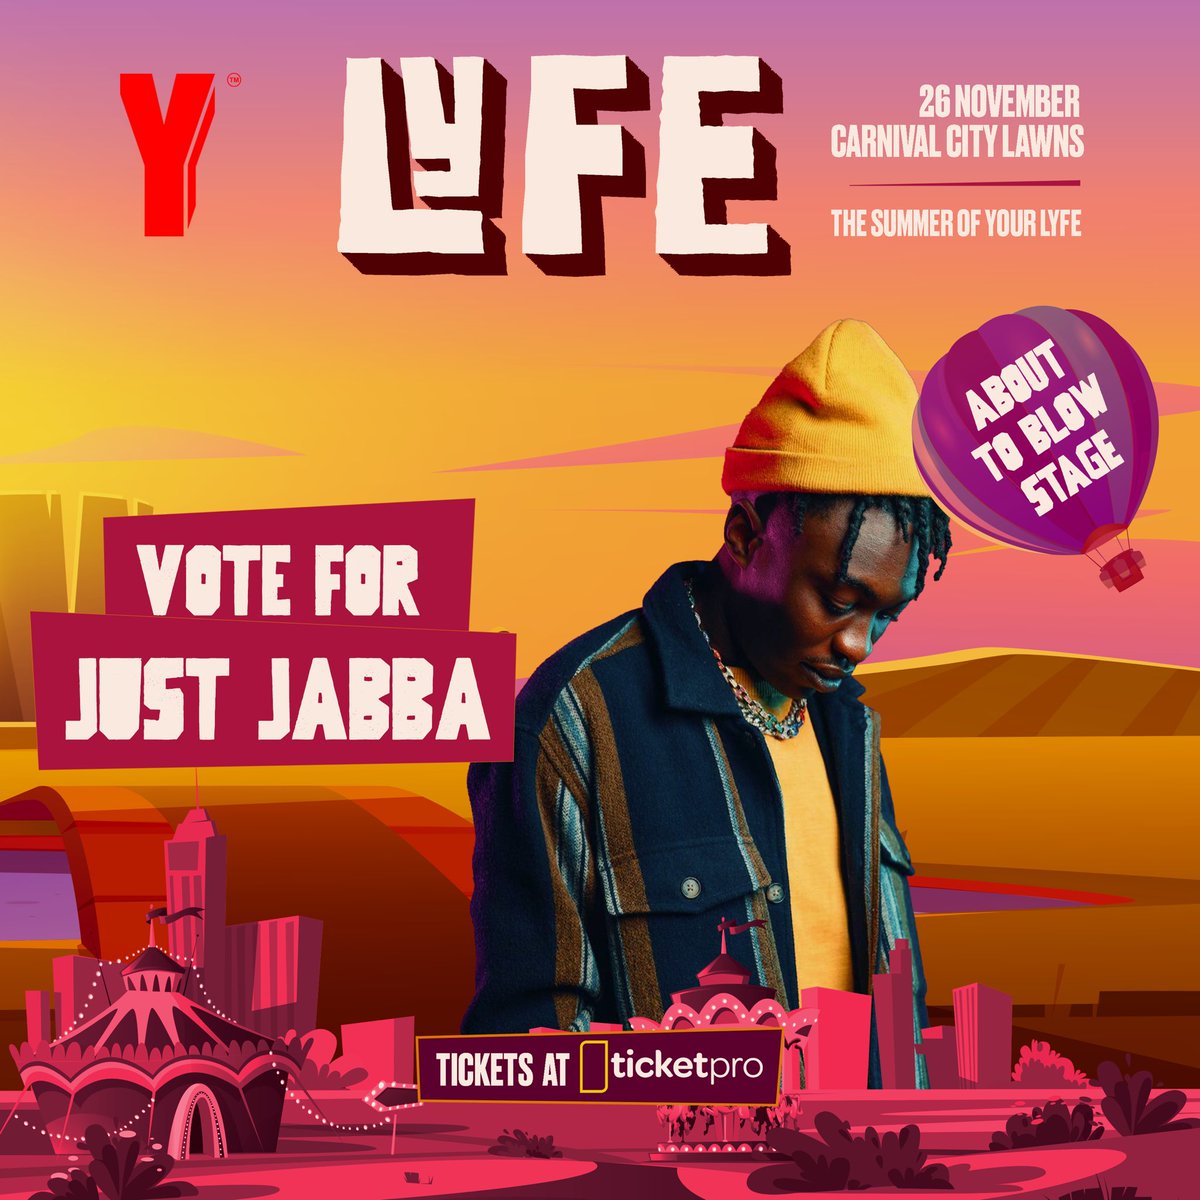 On the 26th of November we are operating in the East Rand at Carnival City Lawns, so #YNot give two upcoming artists from the East an opportunity to perform on the #AboutToBlowStage. To vote for @JustJabba. Retweet this post. Competition closes at 5pm on Sunday 30 Oct.